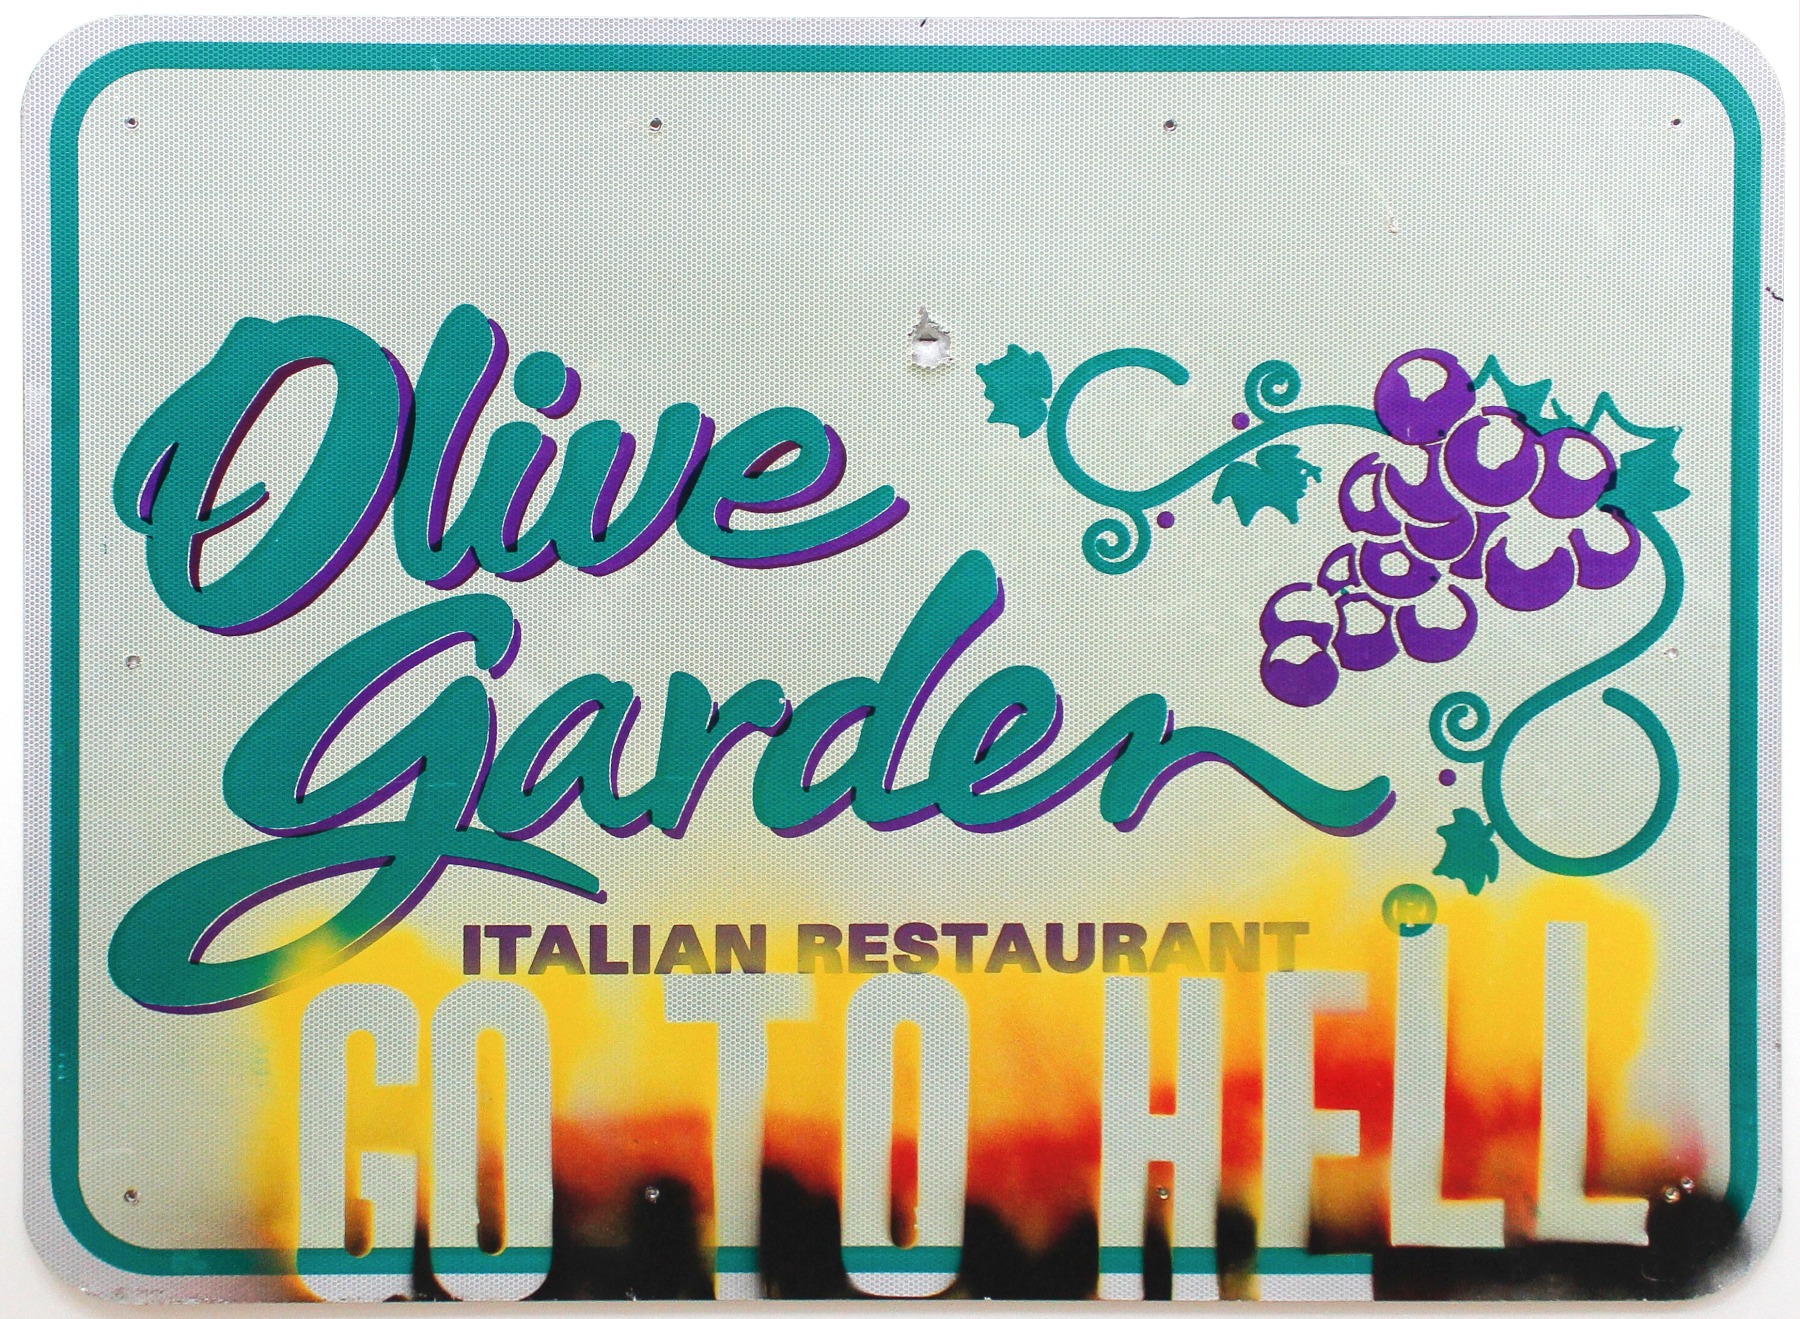 GO TO HELL/OLIVE GARDEN, 2009  Spray paint on metal sign  36 x 48 inches